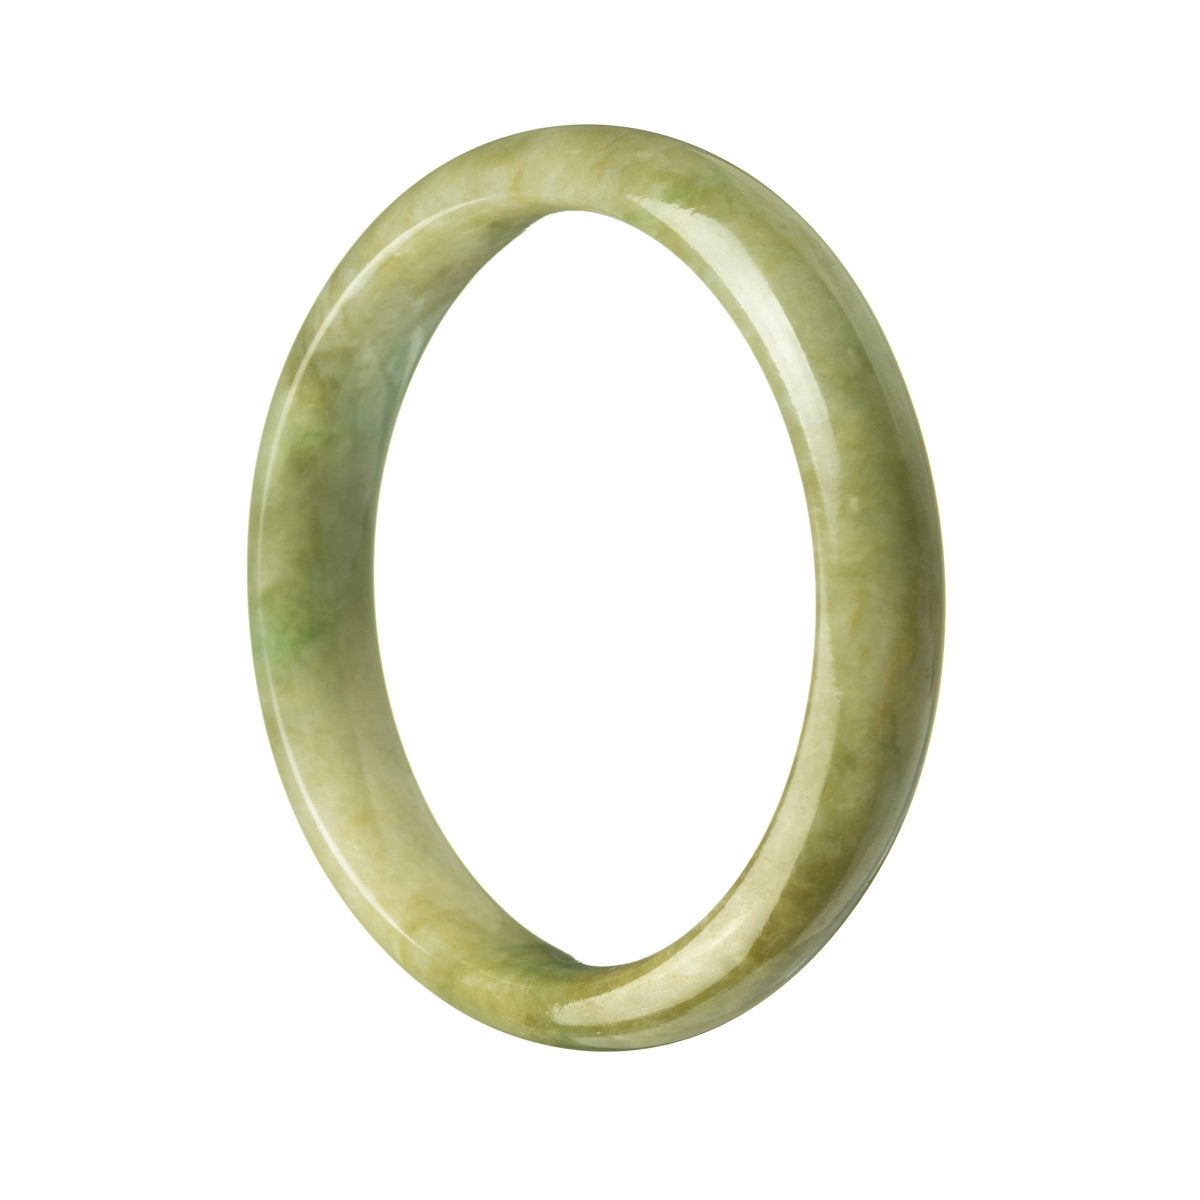 Close-up image of an exquisite Burmese Jade bangle bracelet, featuring a rich brownish green hue and a polished half-moon shape. The bracelet has an authentic Grade A quality and measures 58mm in diameter. Crafted with utmost precision and care, this stunning piece from MAYS Jewelry is a timeless accessory that exudes elegance and sophistication.